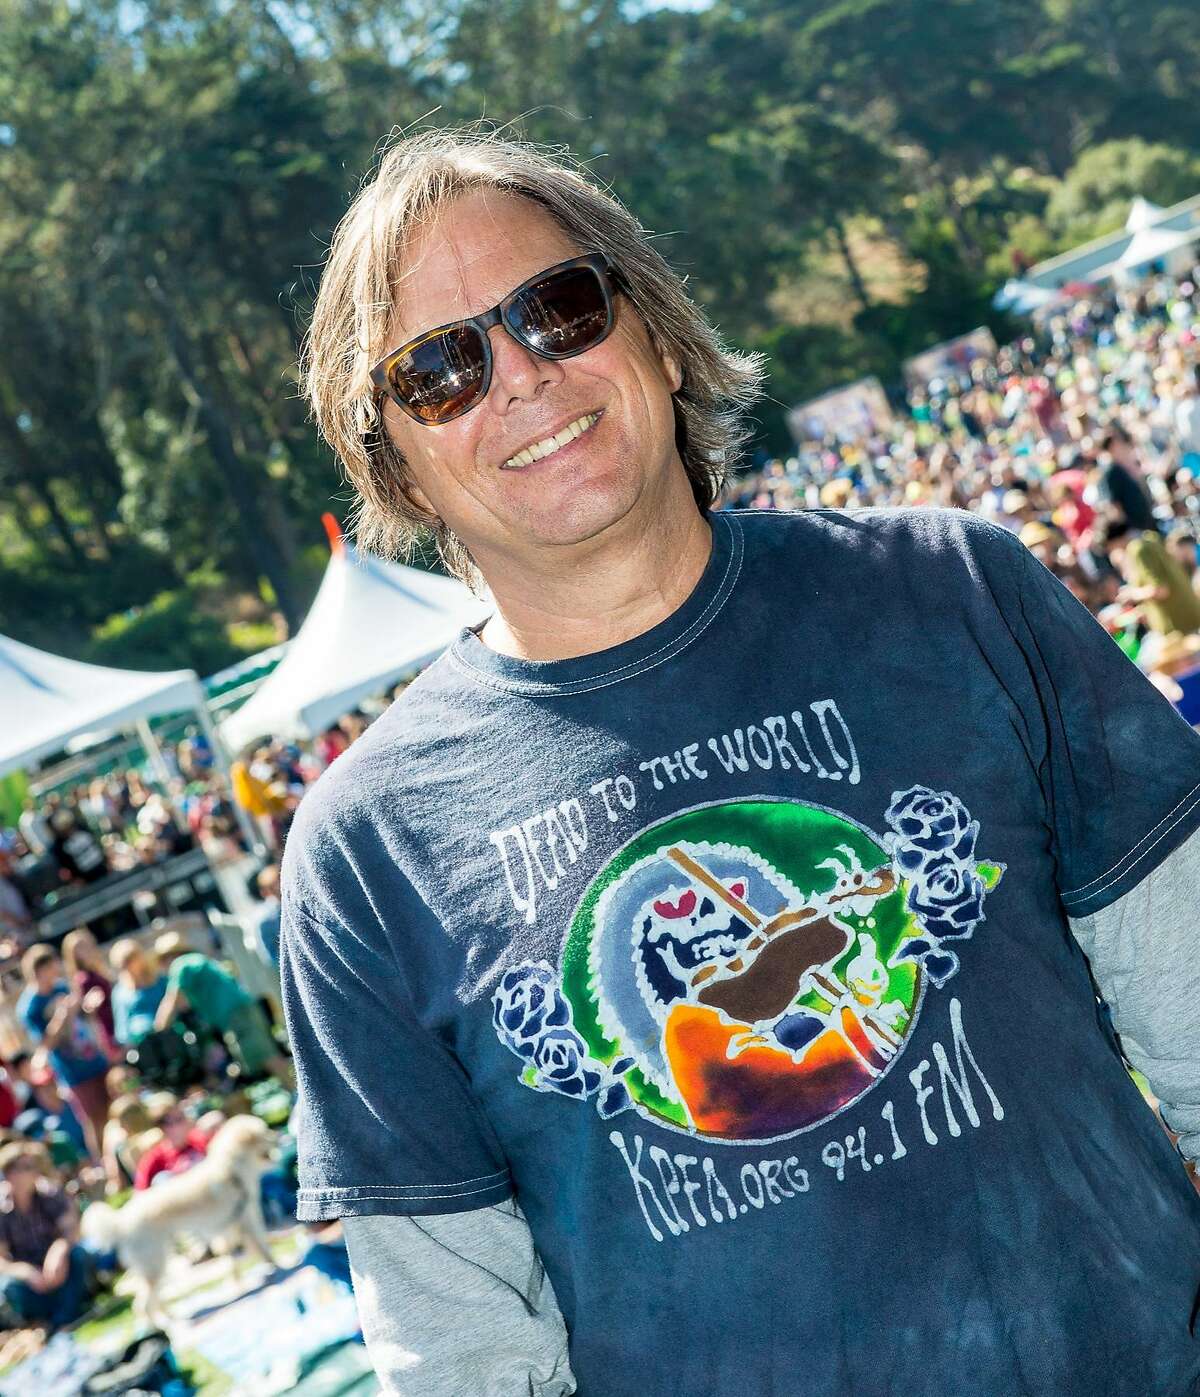 Stage Emcee Tim Lynch at Hardly Strictly Bluegrass in 2016.